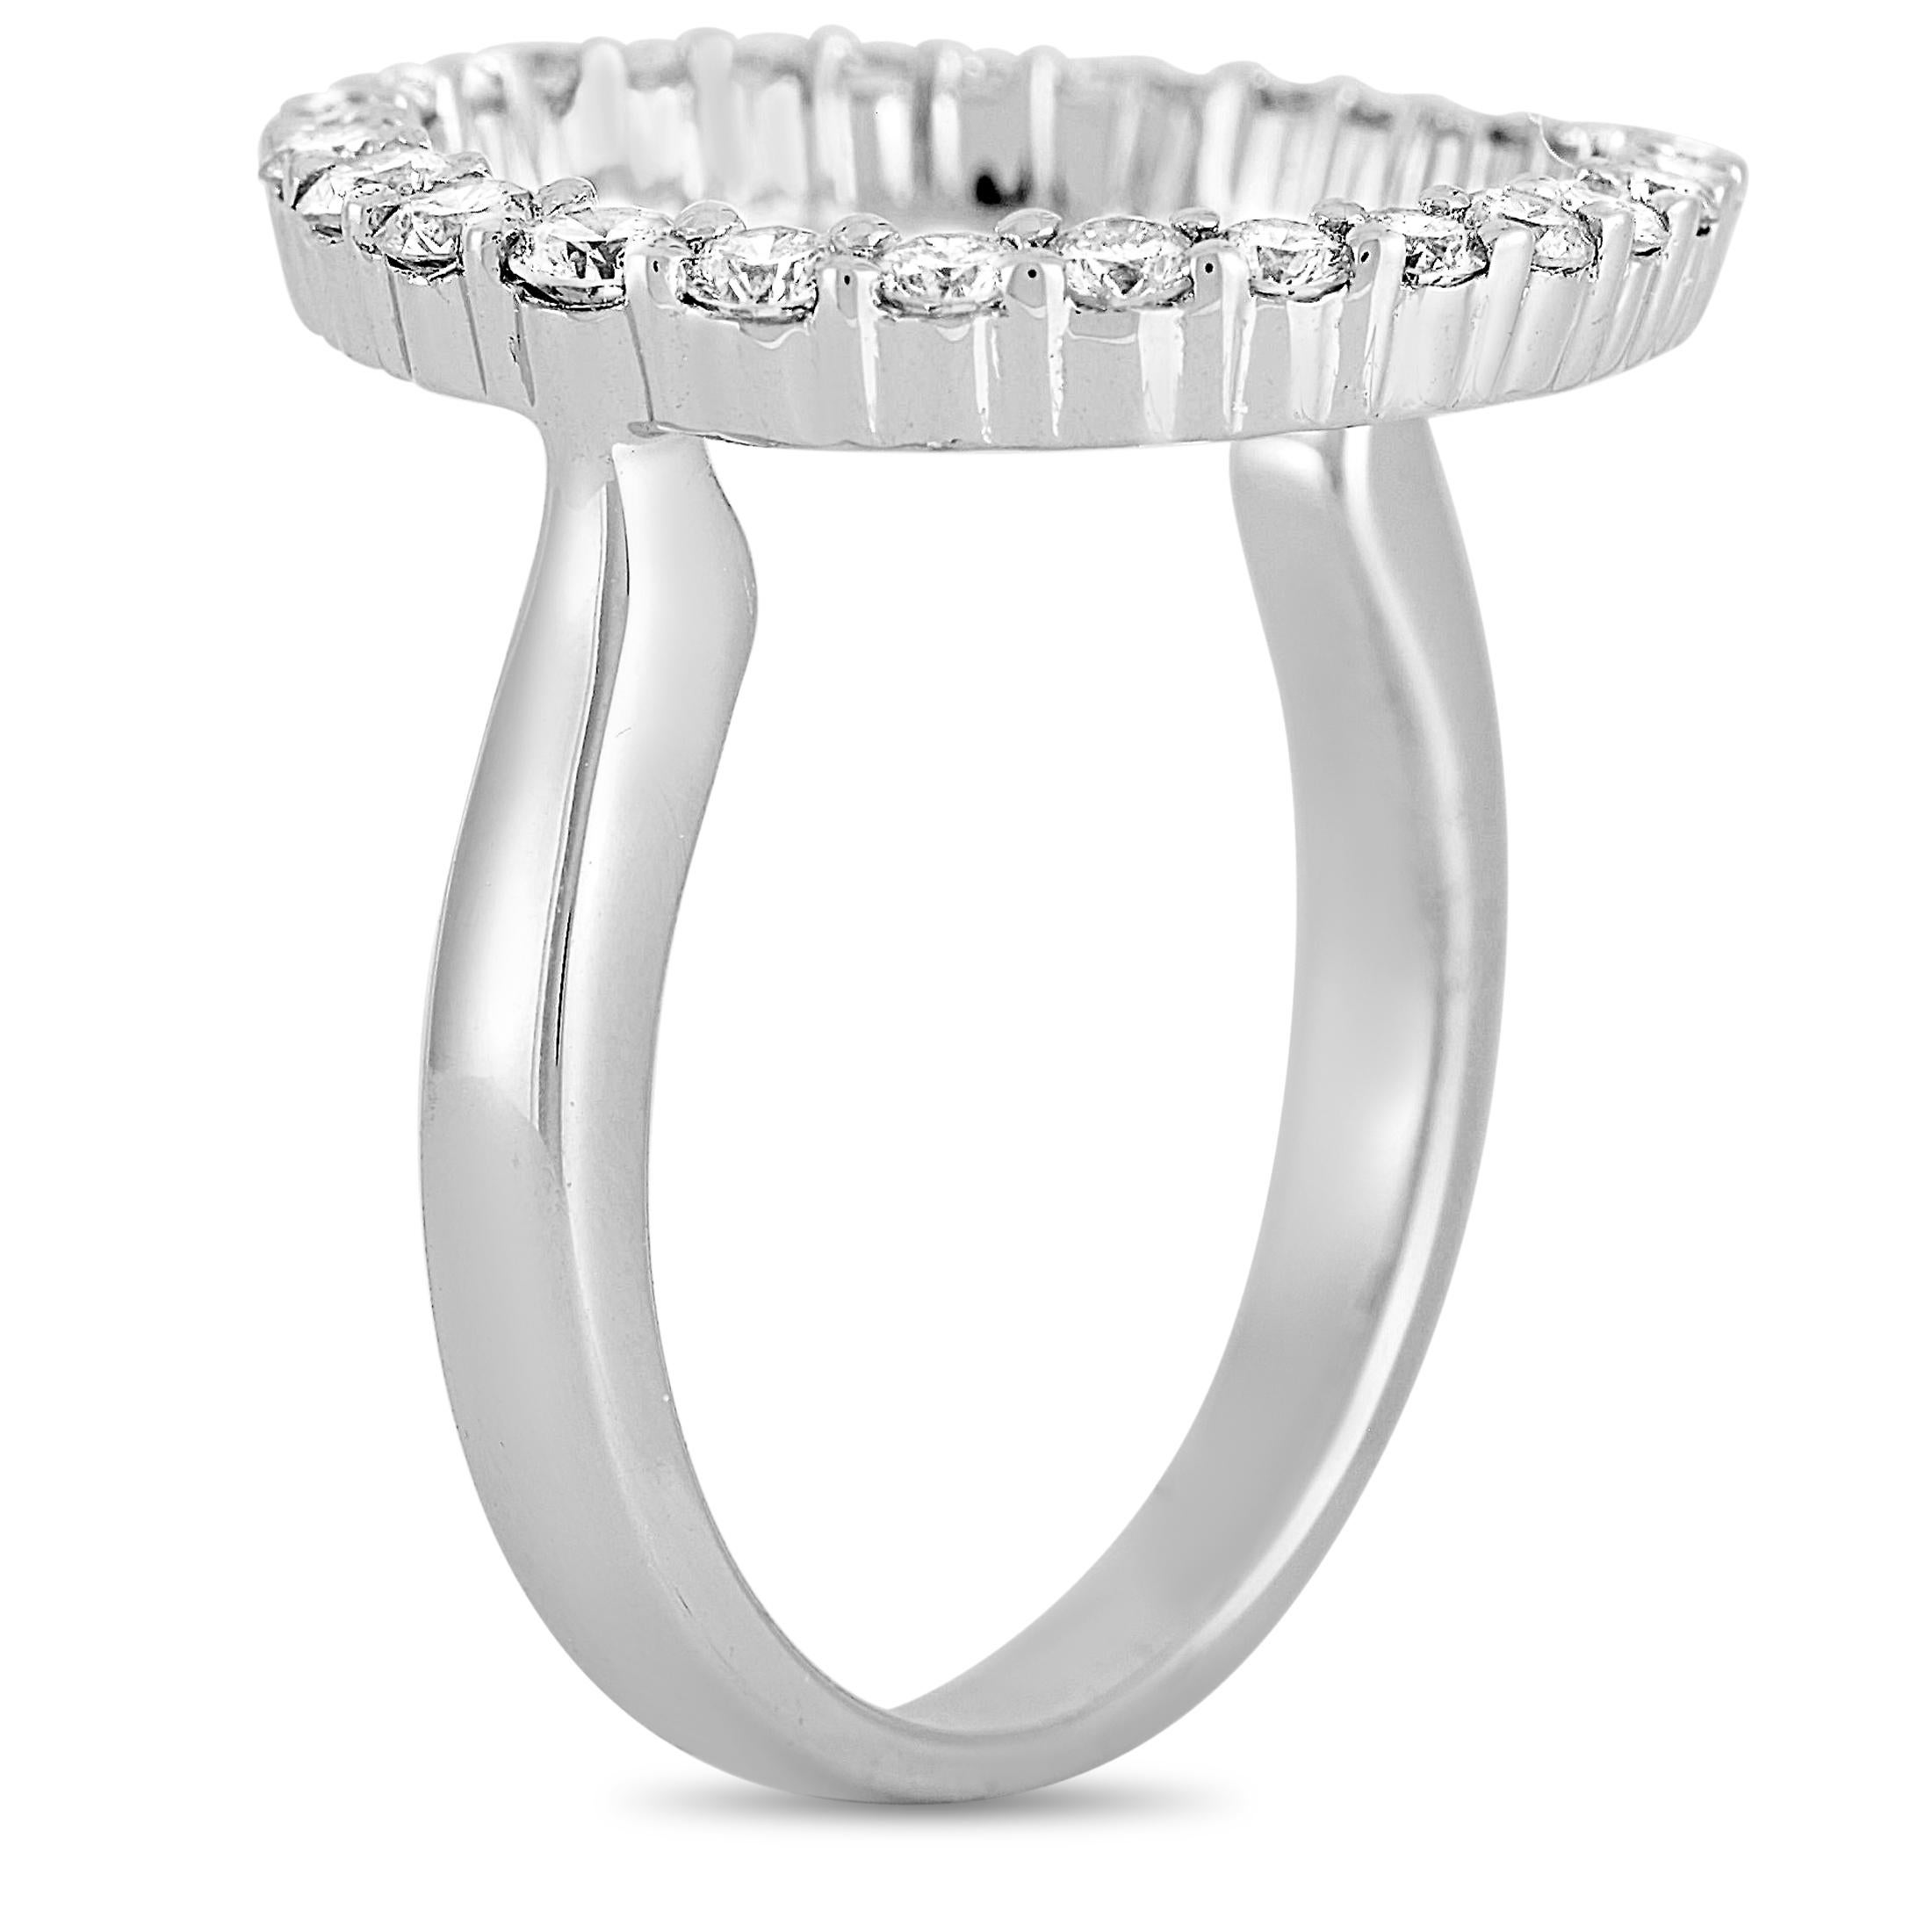 This LB Exclusive ring is made of 18K white gold and embellished with diamonds that amount to 0.65 carats. The ring weighs 4.5 grams and boasts band thickness of 2 mm and top height of 2 mm, while top dimensions measure 20 by 18 mm.
 
 Offered in